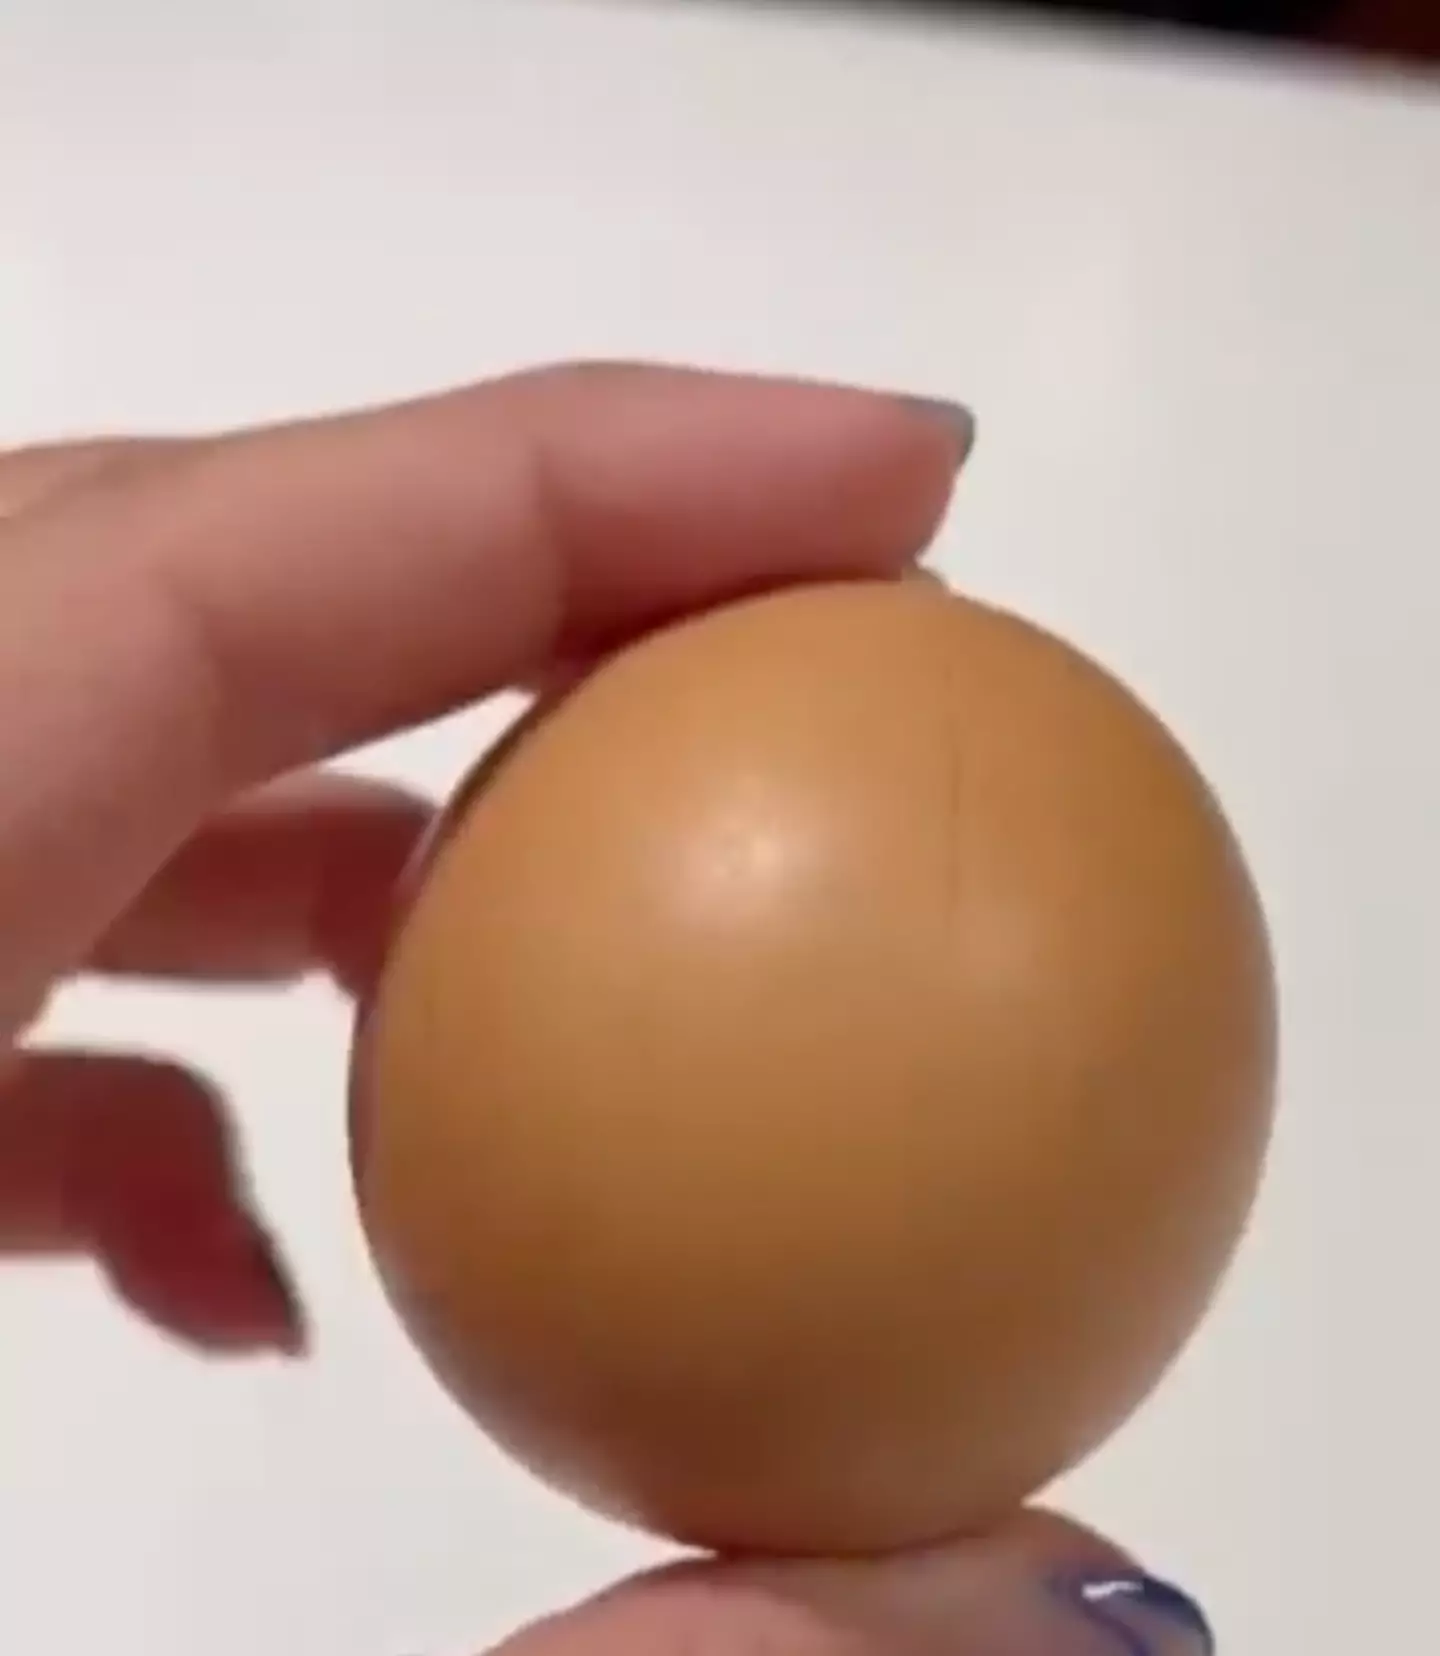 The perfectly round egg.